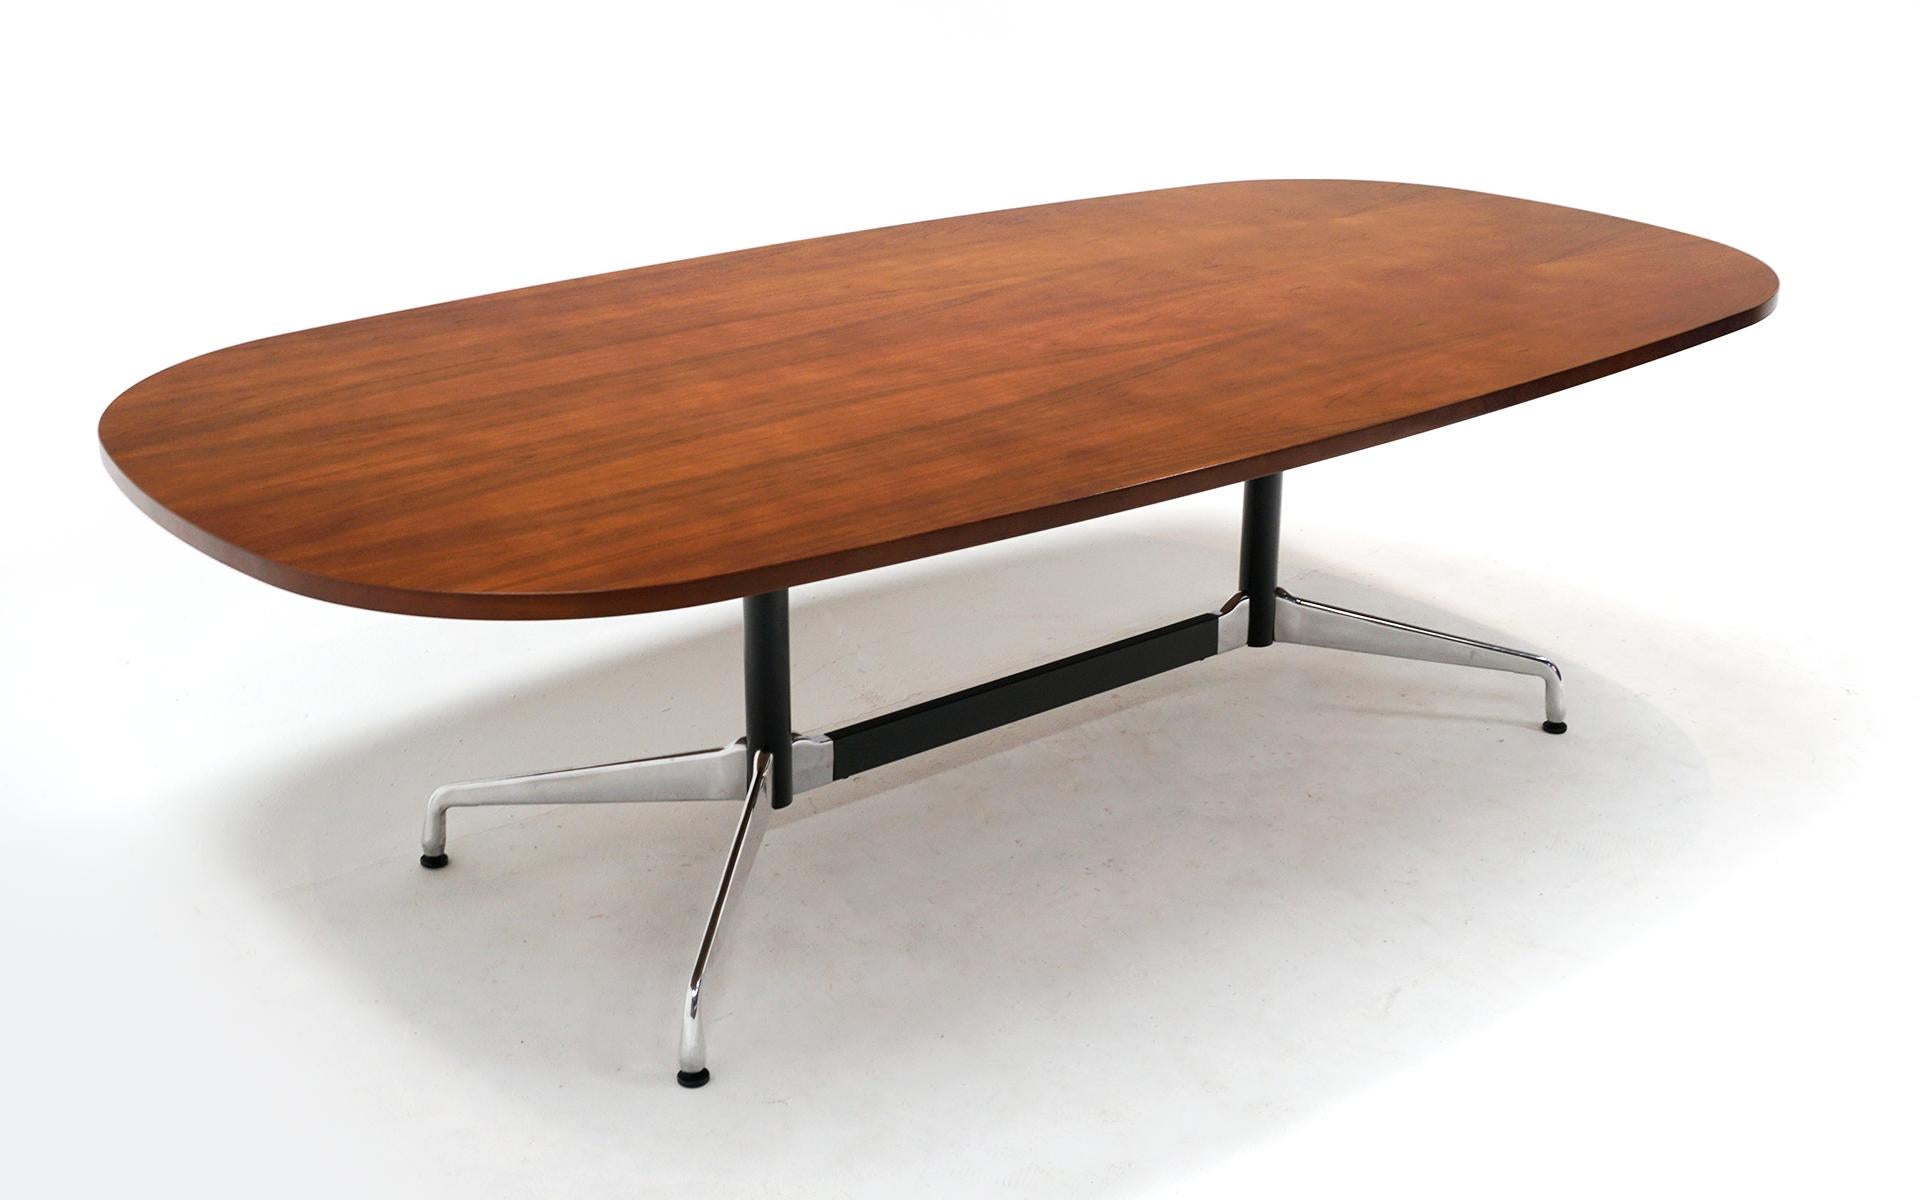 Eight foot long walnut dining / conference table designed by Charles and Ray Eames, manufactured by Herman Miller. Signed with the Eames Herman Miller label. This table was produced in the 2000s and is in very good condition with only a few light